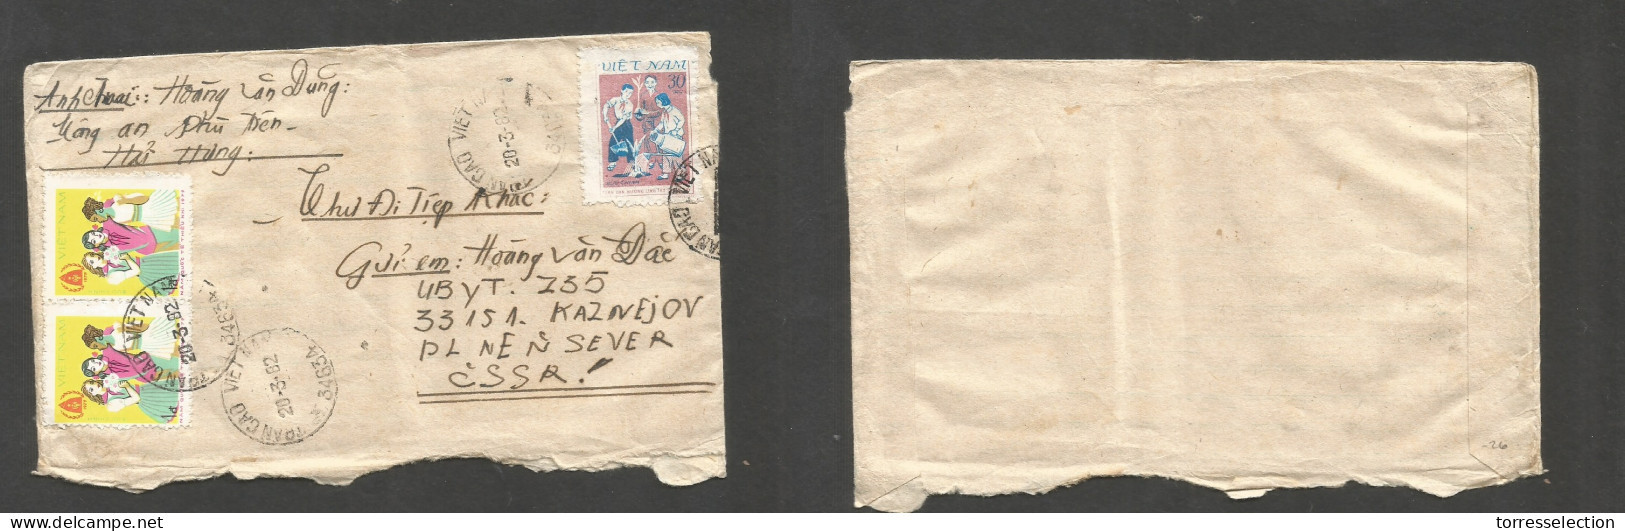 INDOCHINA. 1982 (20 March) North Vietnam. Trancao - Czech Republic. Color Multifkd Envelope At 2,30d Rate. VF, Tied Cds. - Autres - Asie